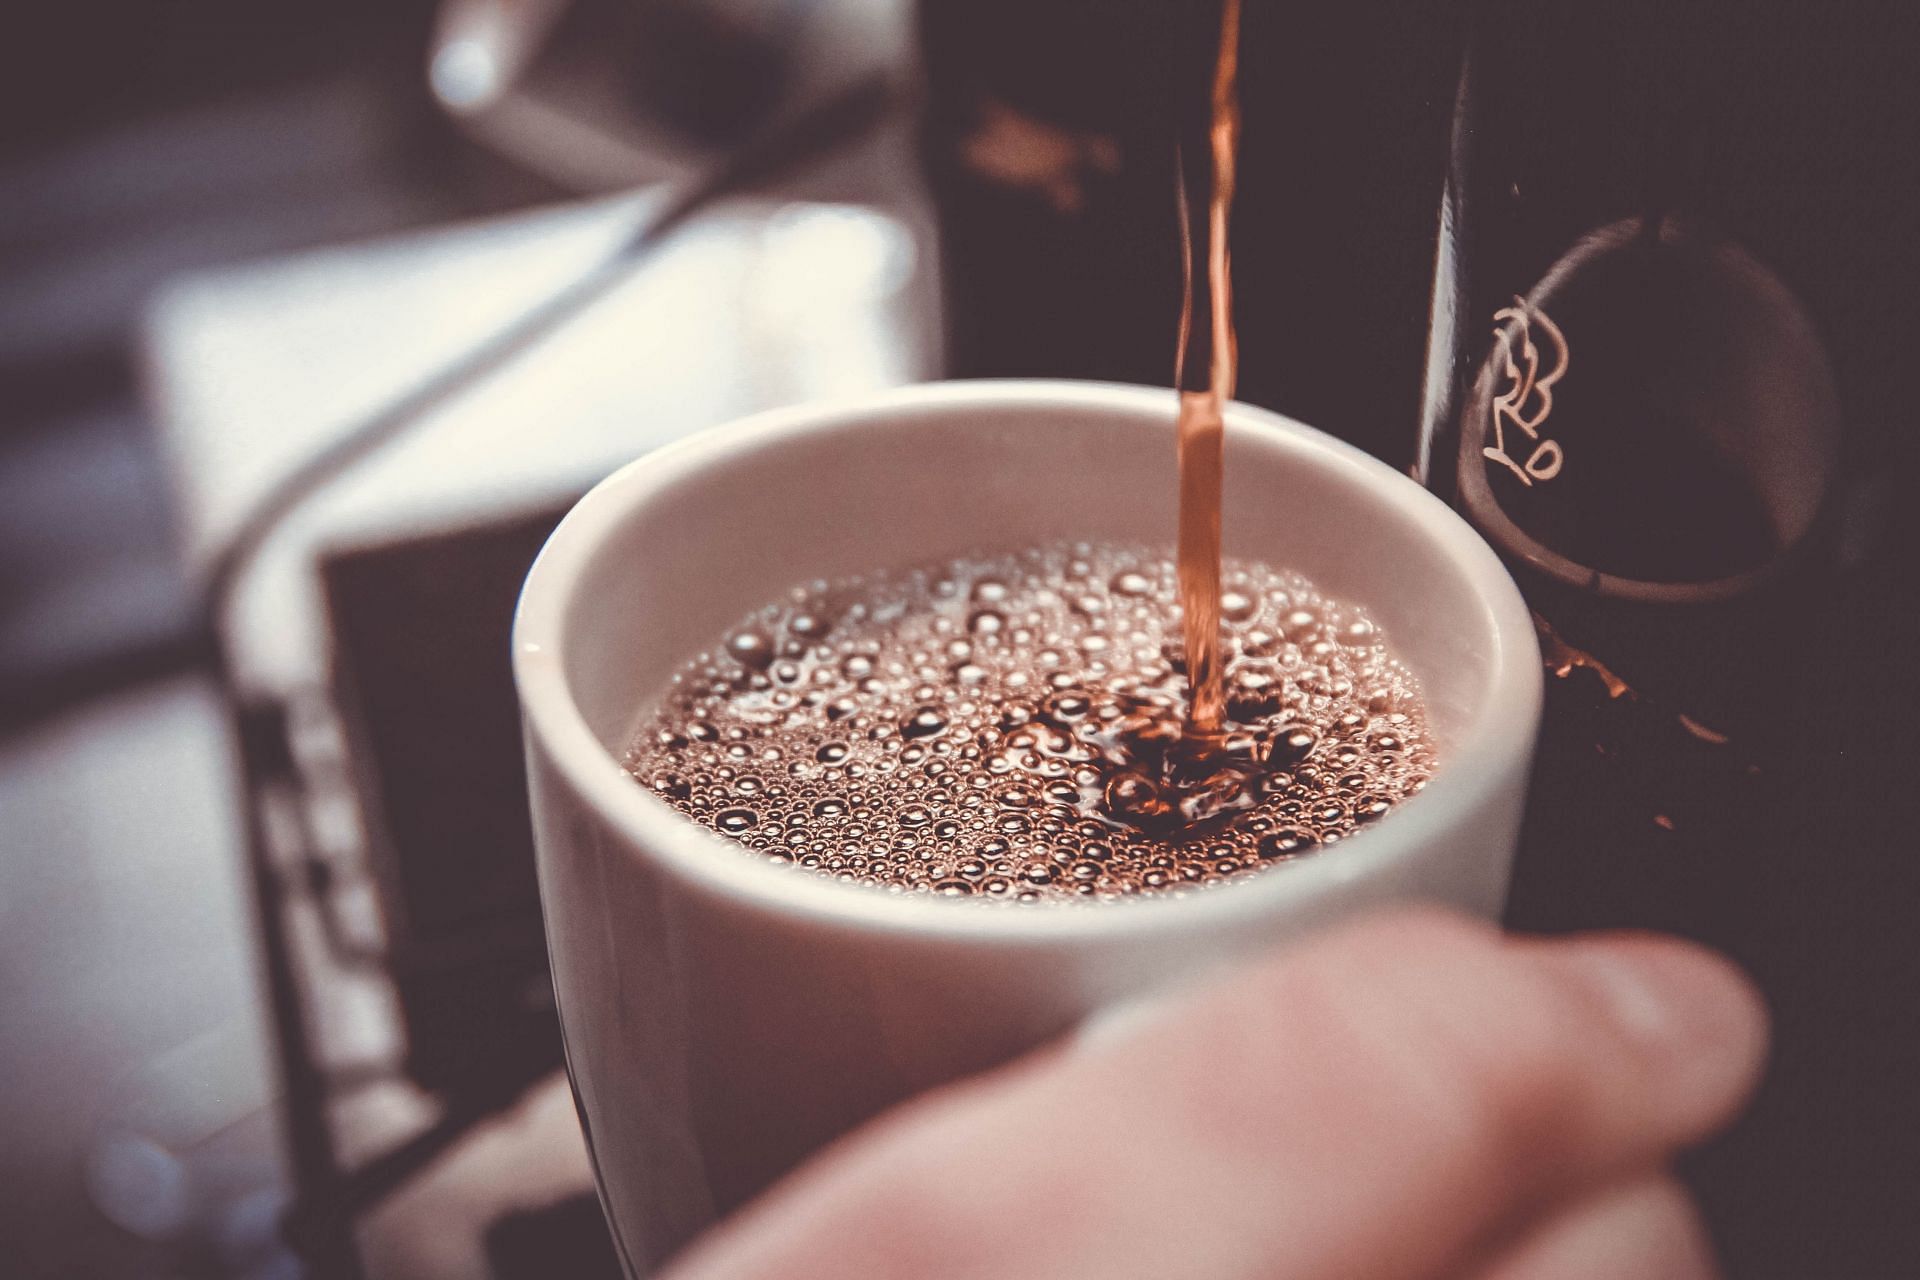 Avoid drinking coffee or tea before fasted workout. (Image via Unsplash/John Schnobrich)